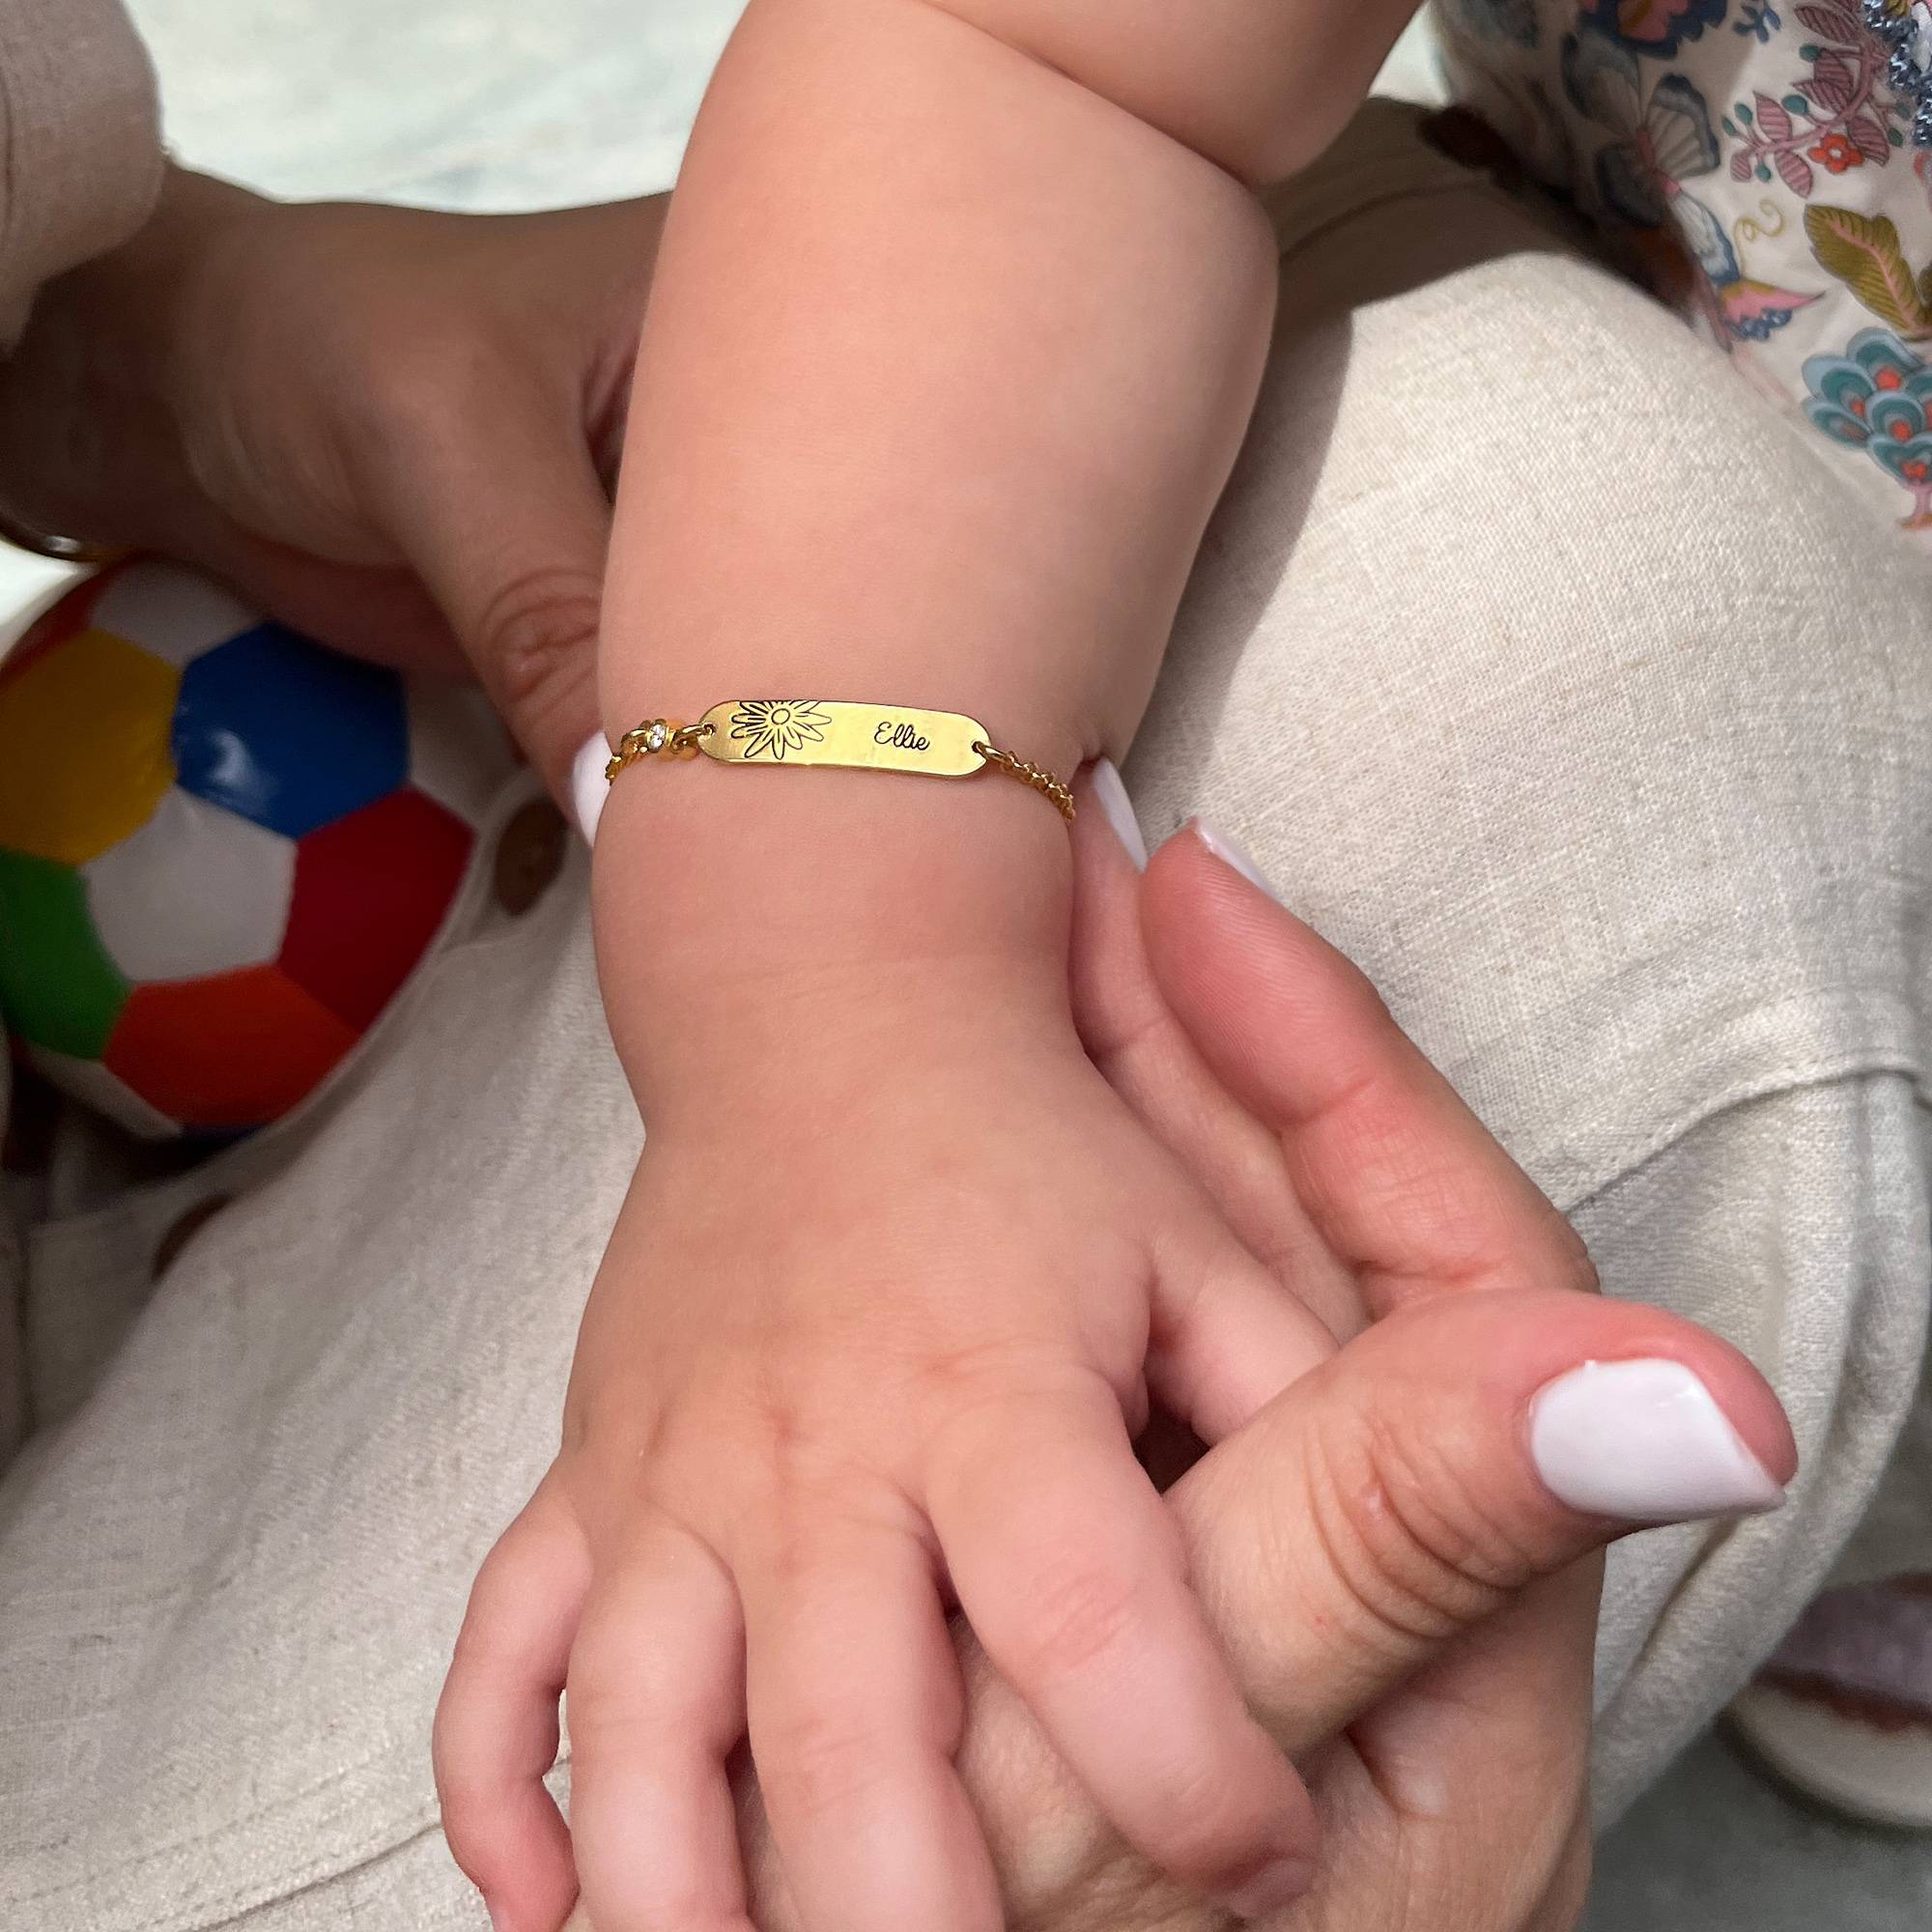 Lyla Baby Name Bracelet with Birth Flower and Stone in 18K Gold Vermeil-1 product photo